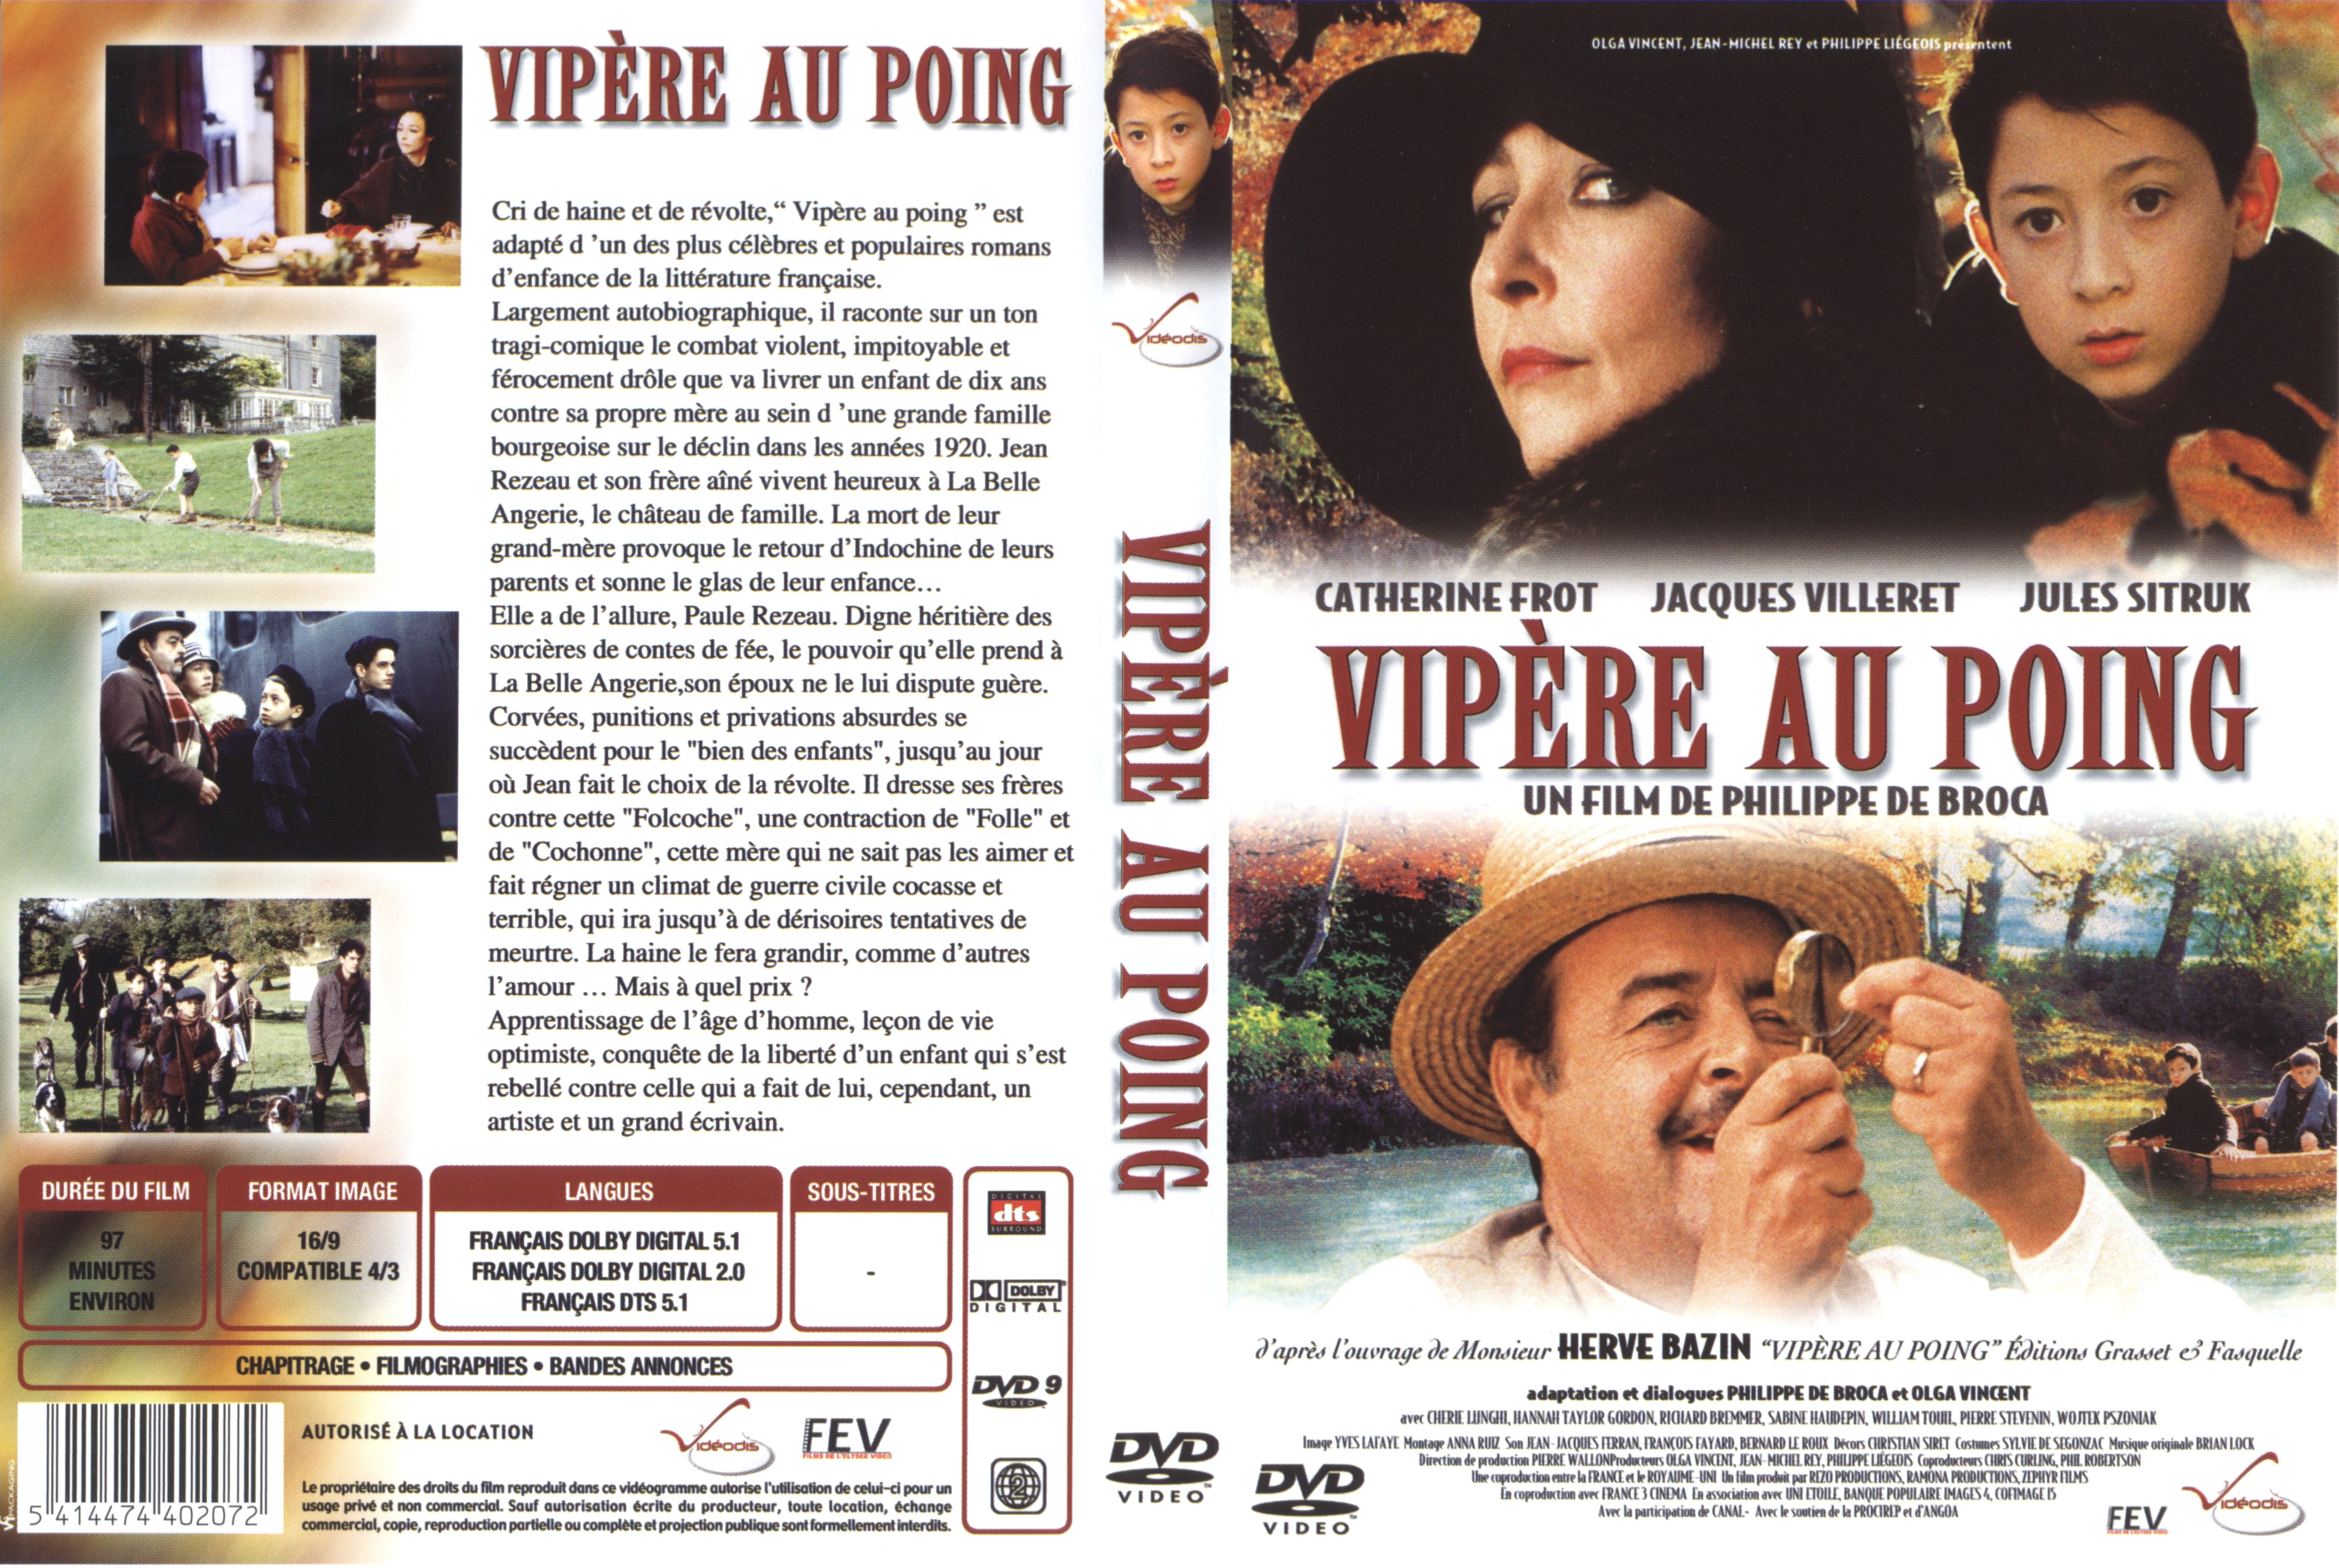 Jaquette DVD Vipere au poing v2